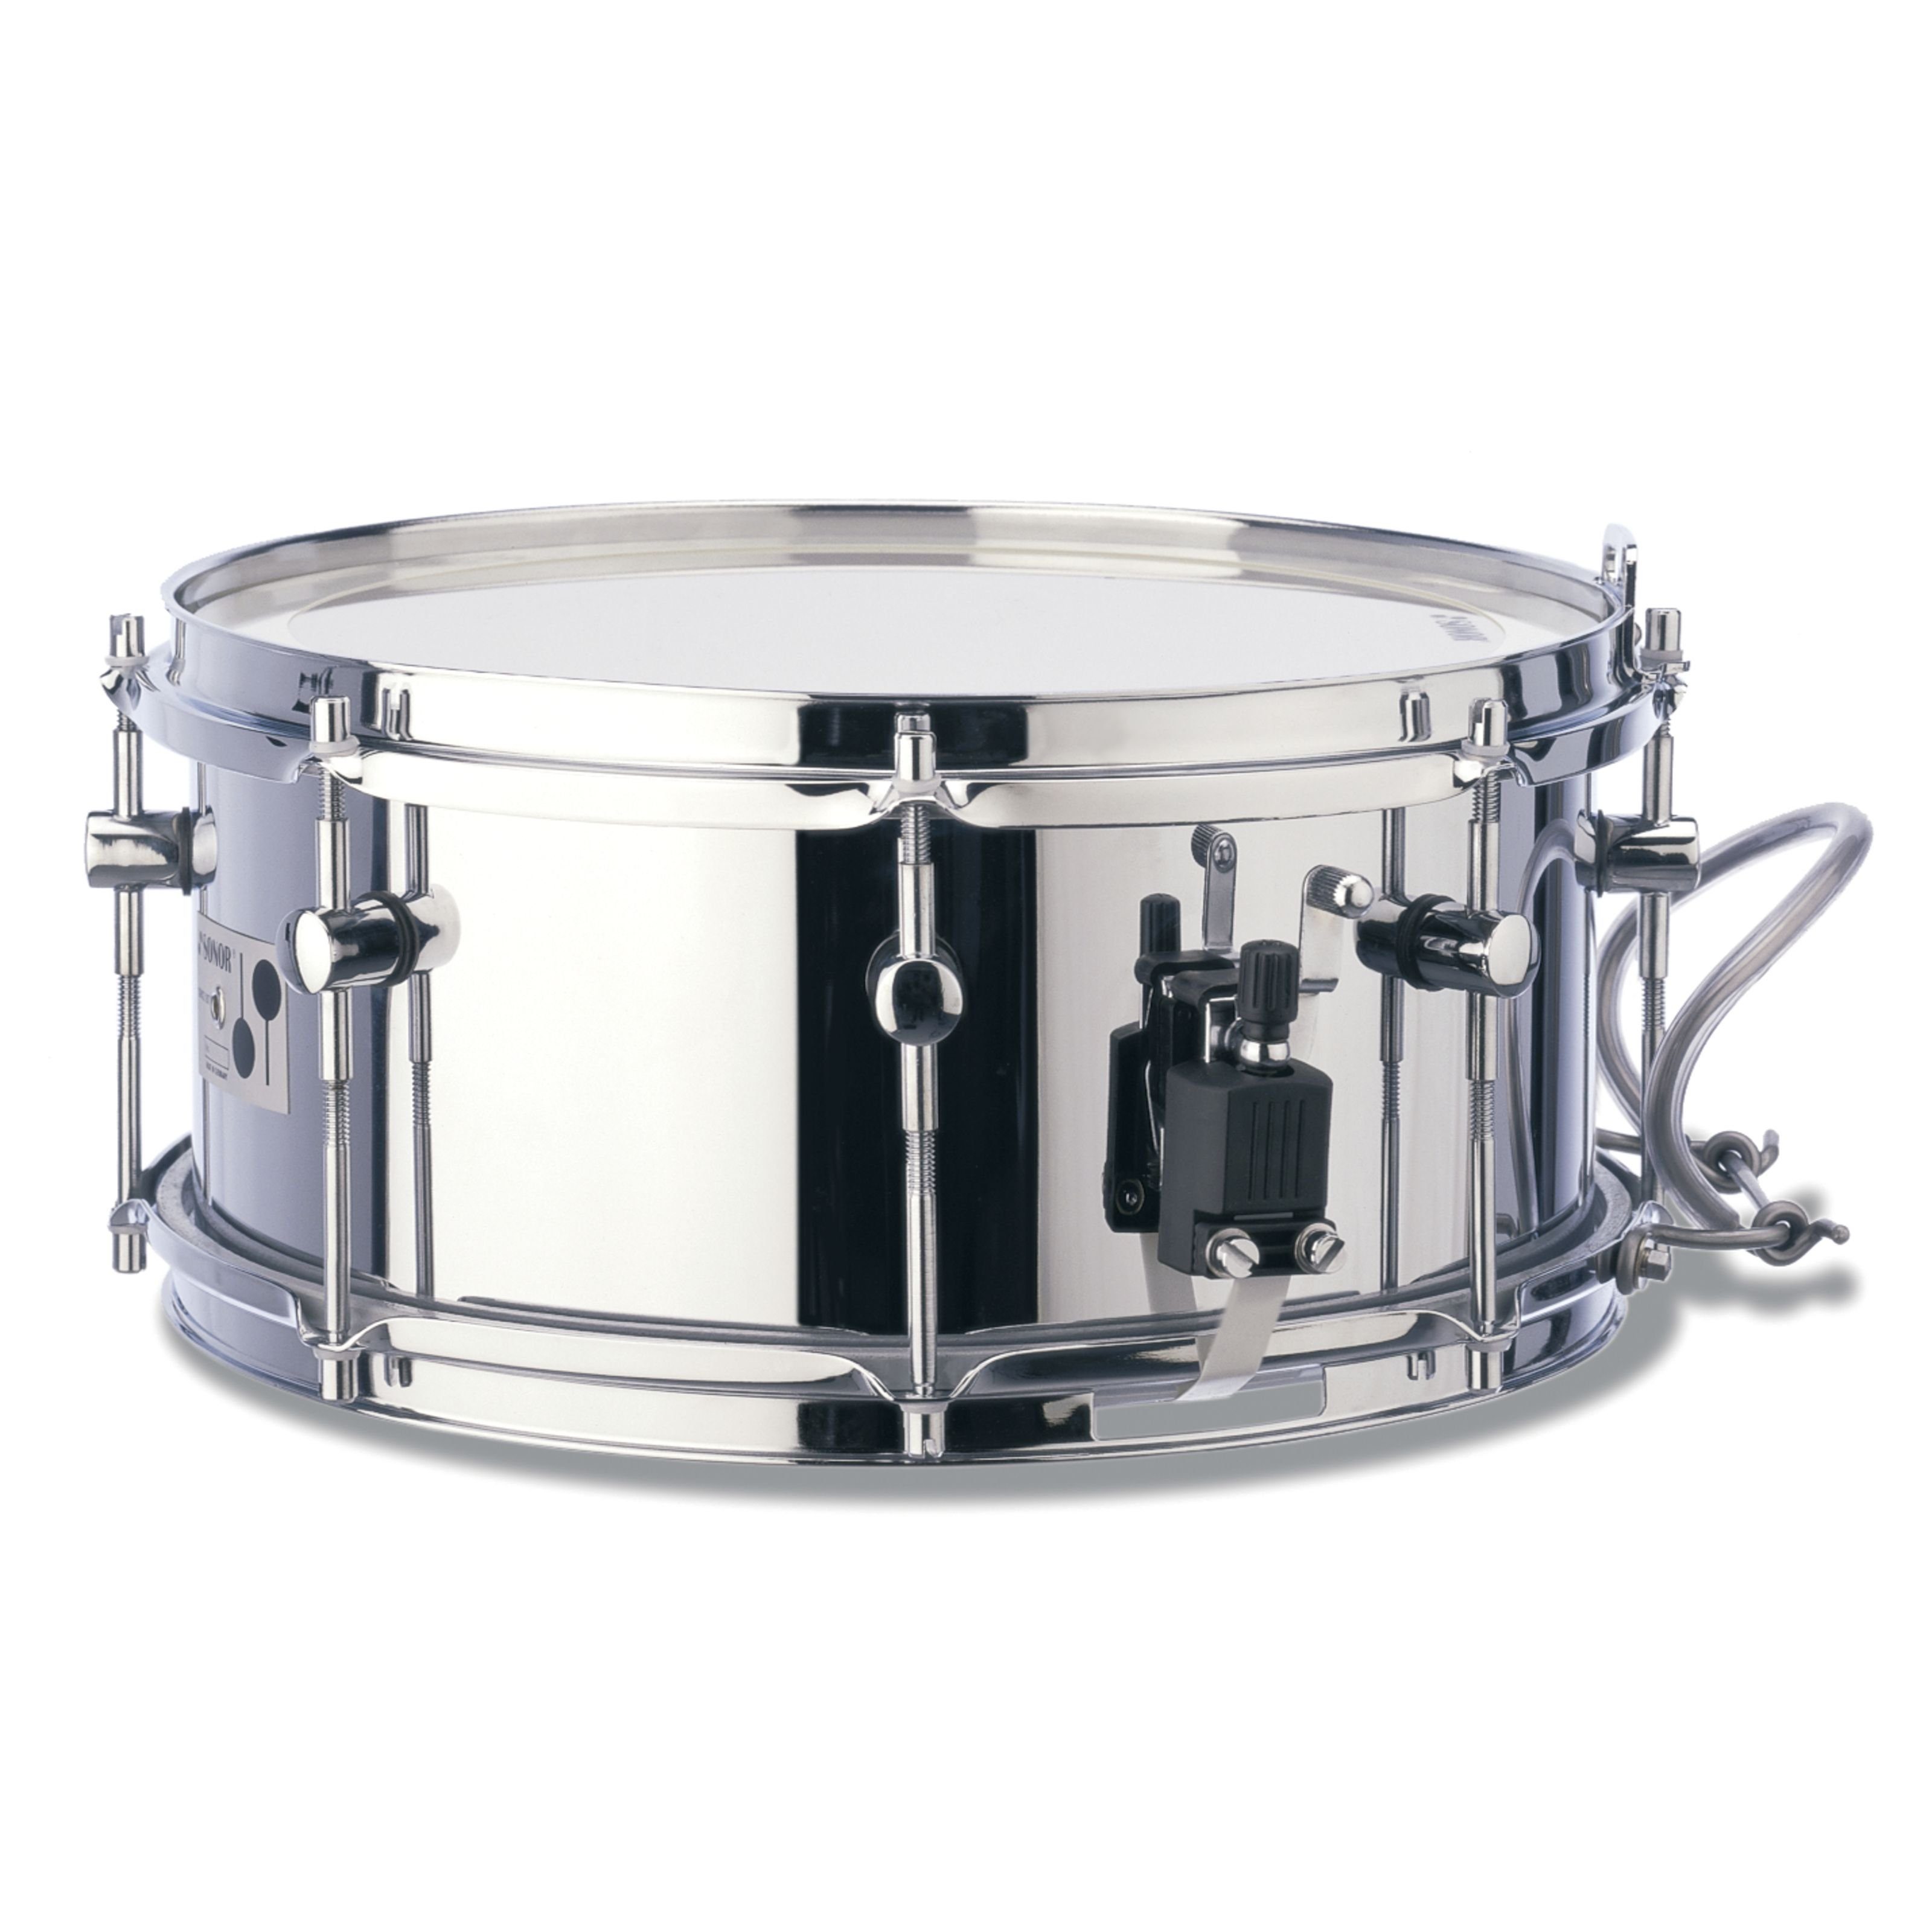 SONOR Snare Drum,Marching Snare MB455M, 14"x5,5", B-Line Serie, Steel, Marching, Snare Drums, Marching Snare MB455M, 14"x5,5", B-Line Serie, Steel - Marching